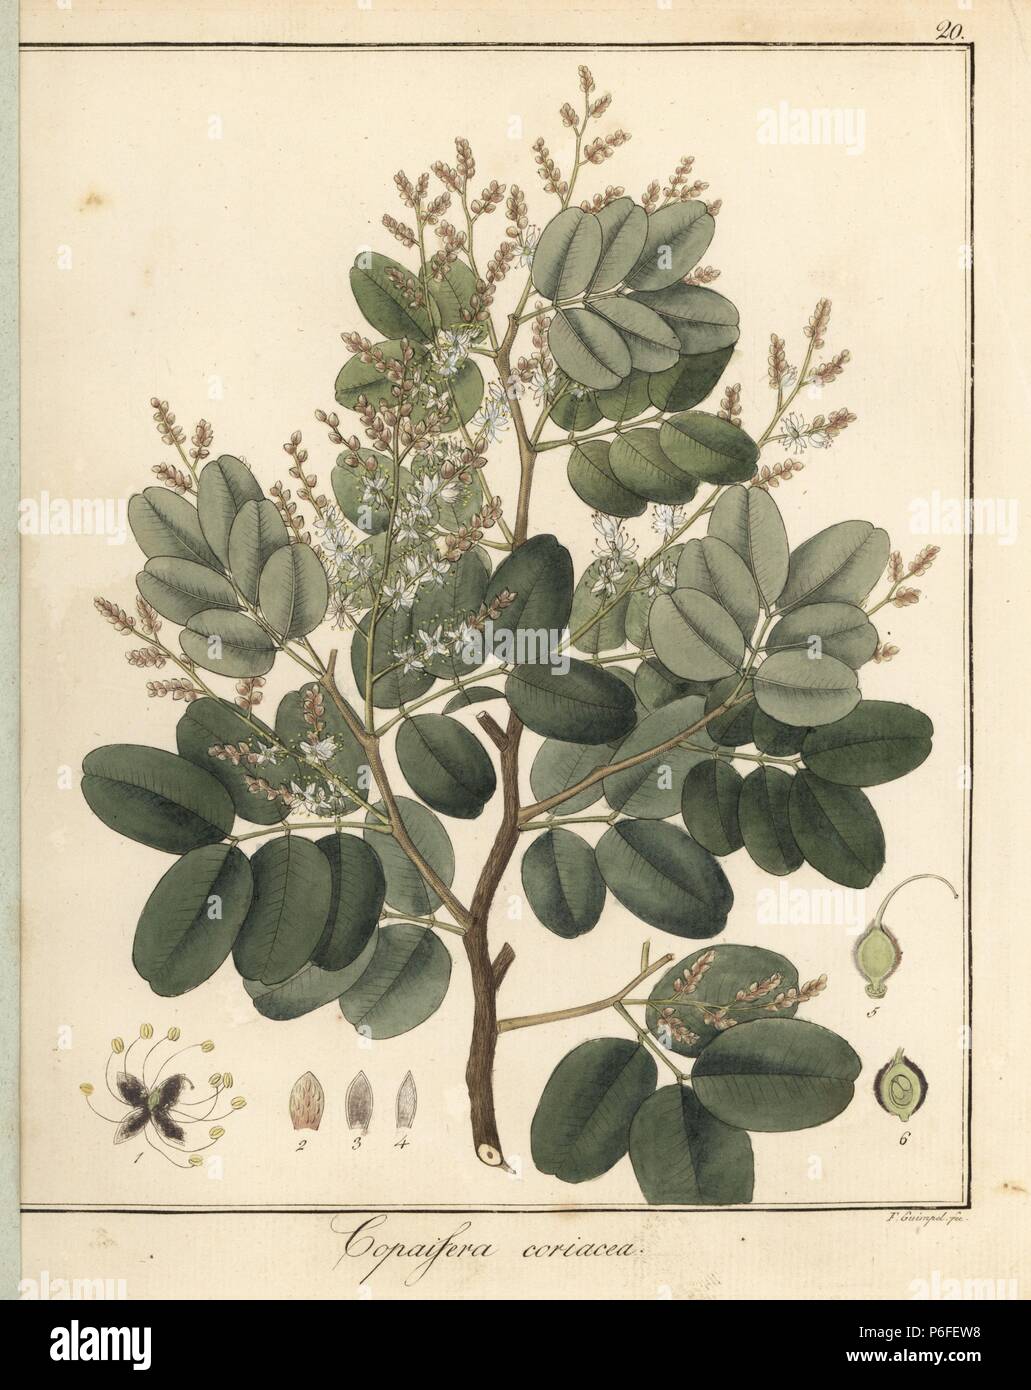 Copal or copaiba tree, Copaifera coriacea. Handcoloured copperplate engraving by F. Guimpel from Dr. Friedrich Gottlob Hayne's Medical Botany, Berlin, 1822. Hayne (1763-1832) was a German botanist, apothecary and professor of pharmaceutical botany at Berlin University. Stock Photo